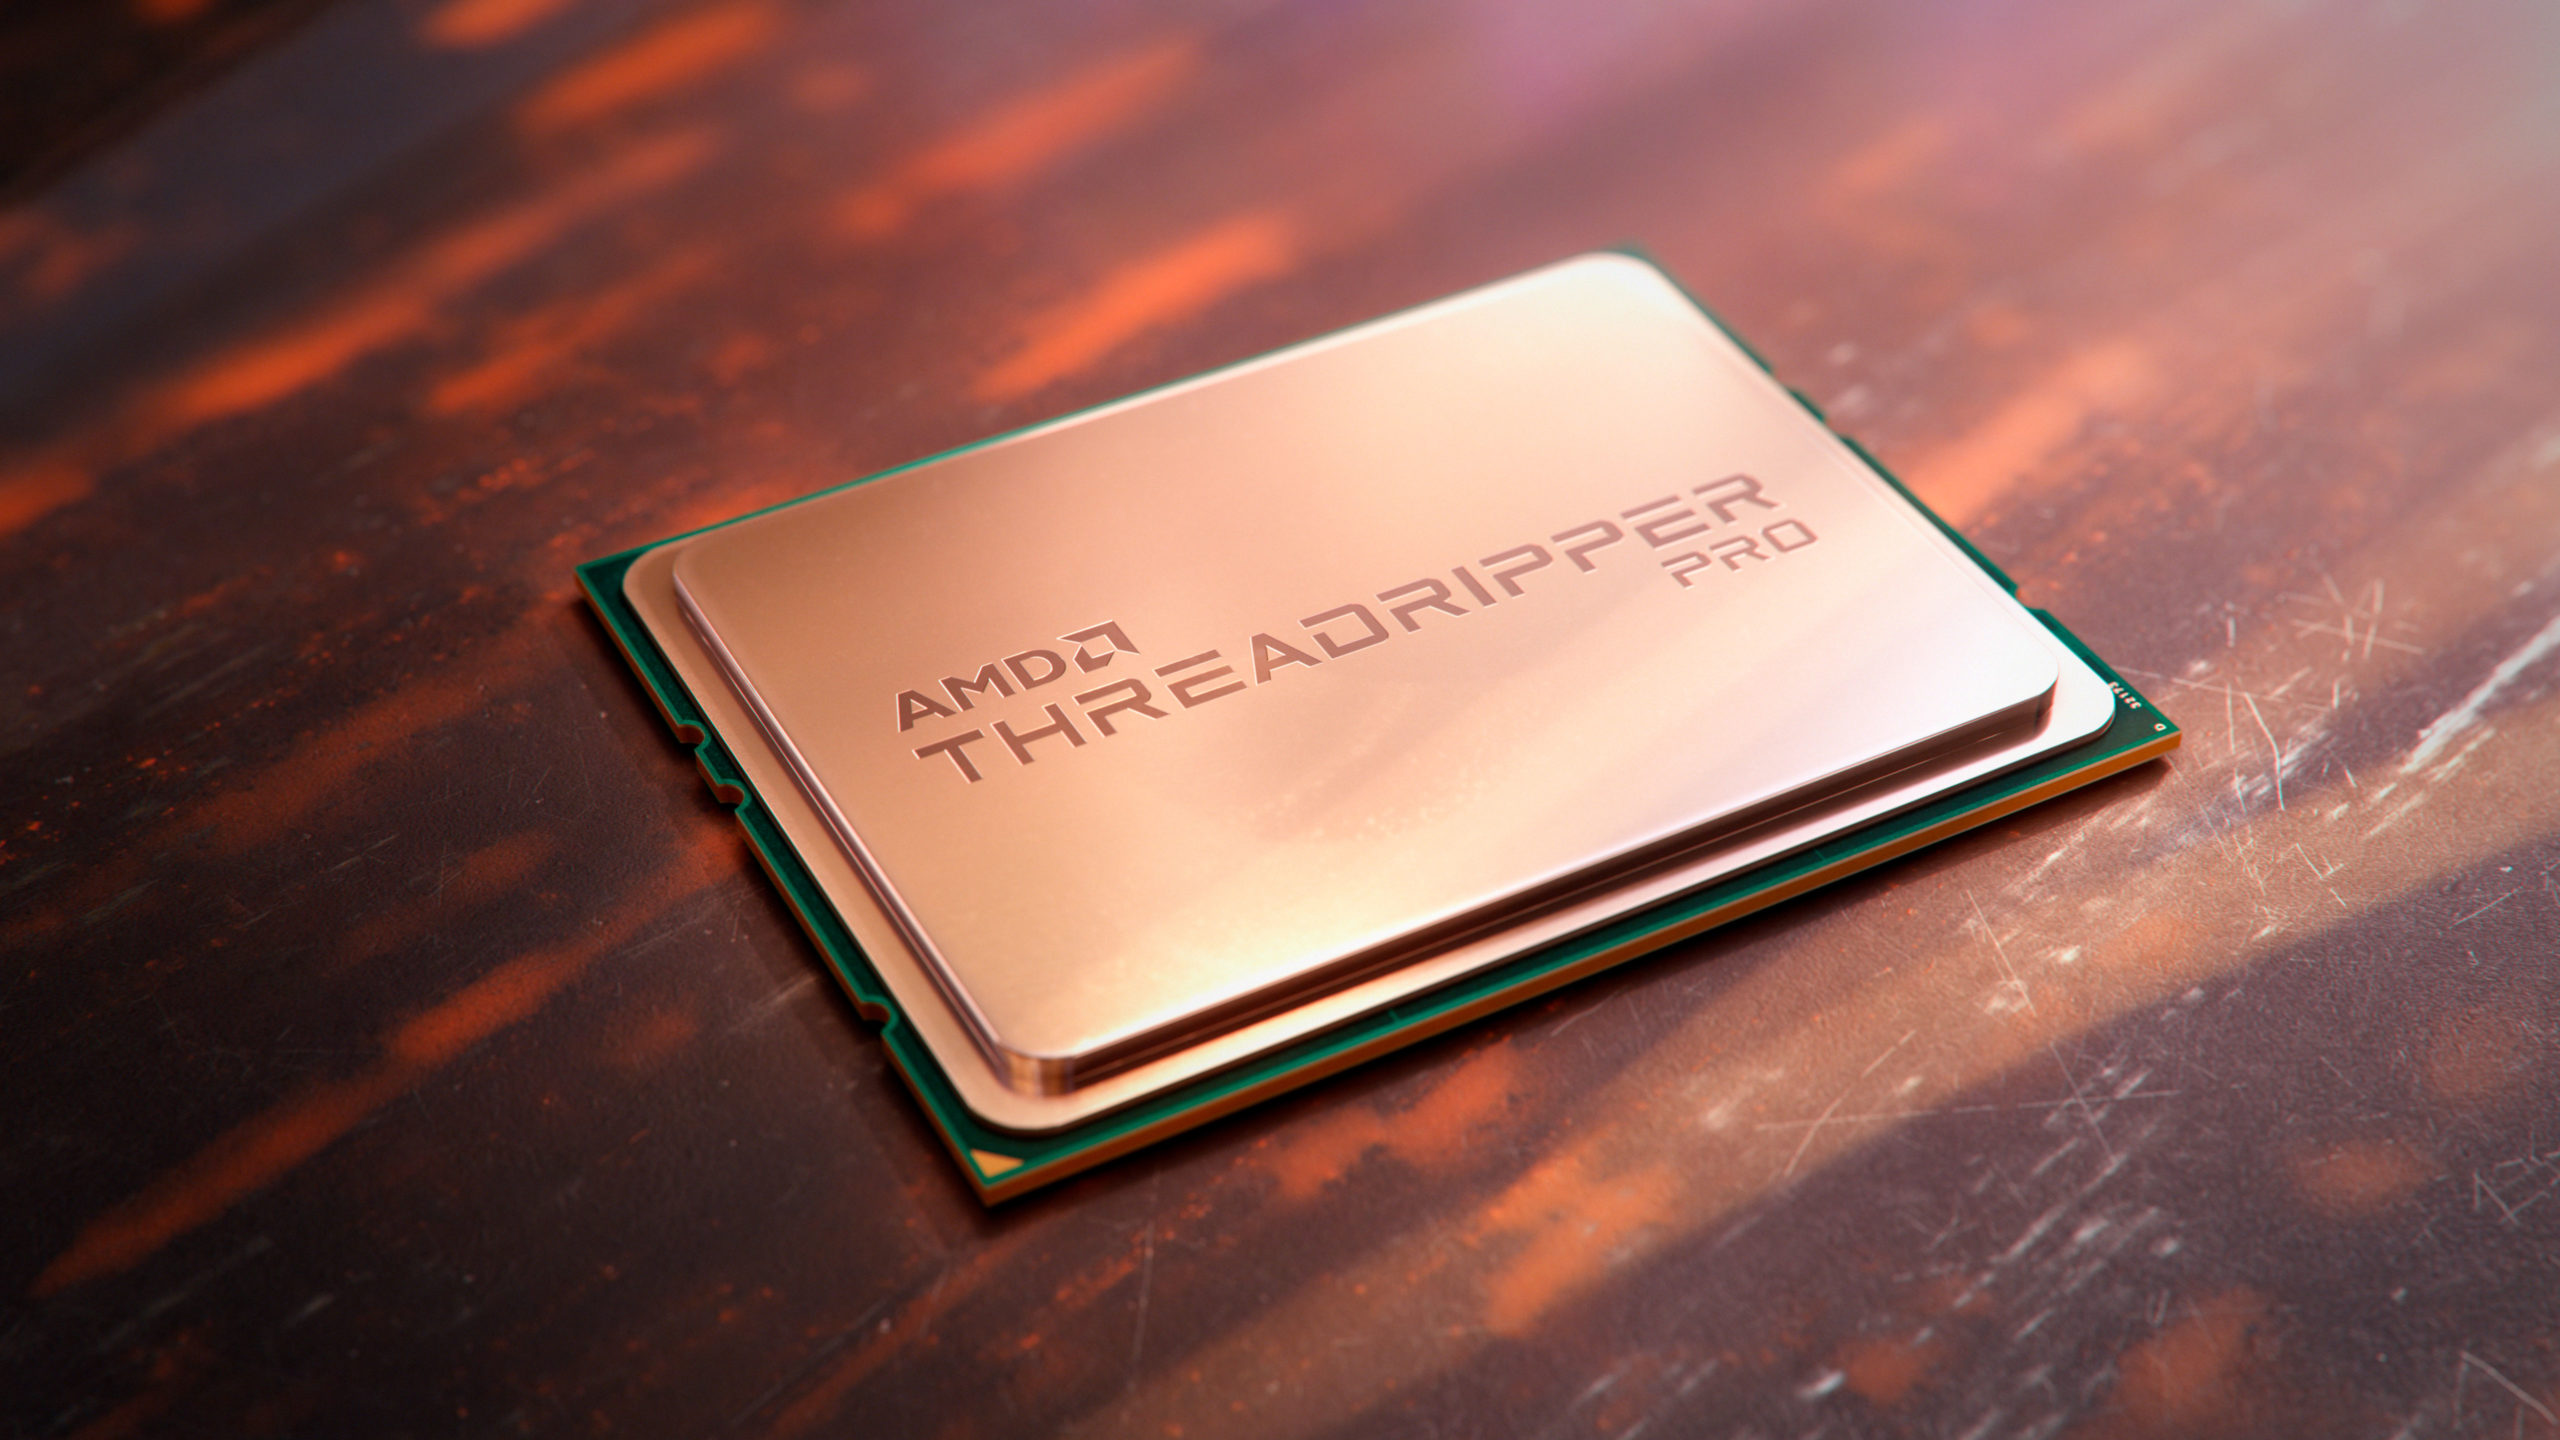 threadripper-pro-goes-gaming-with-nvidia’s-rtx-3080-cloud-gaming-plan